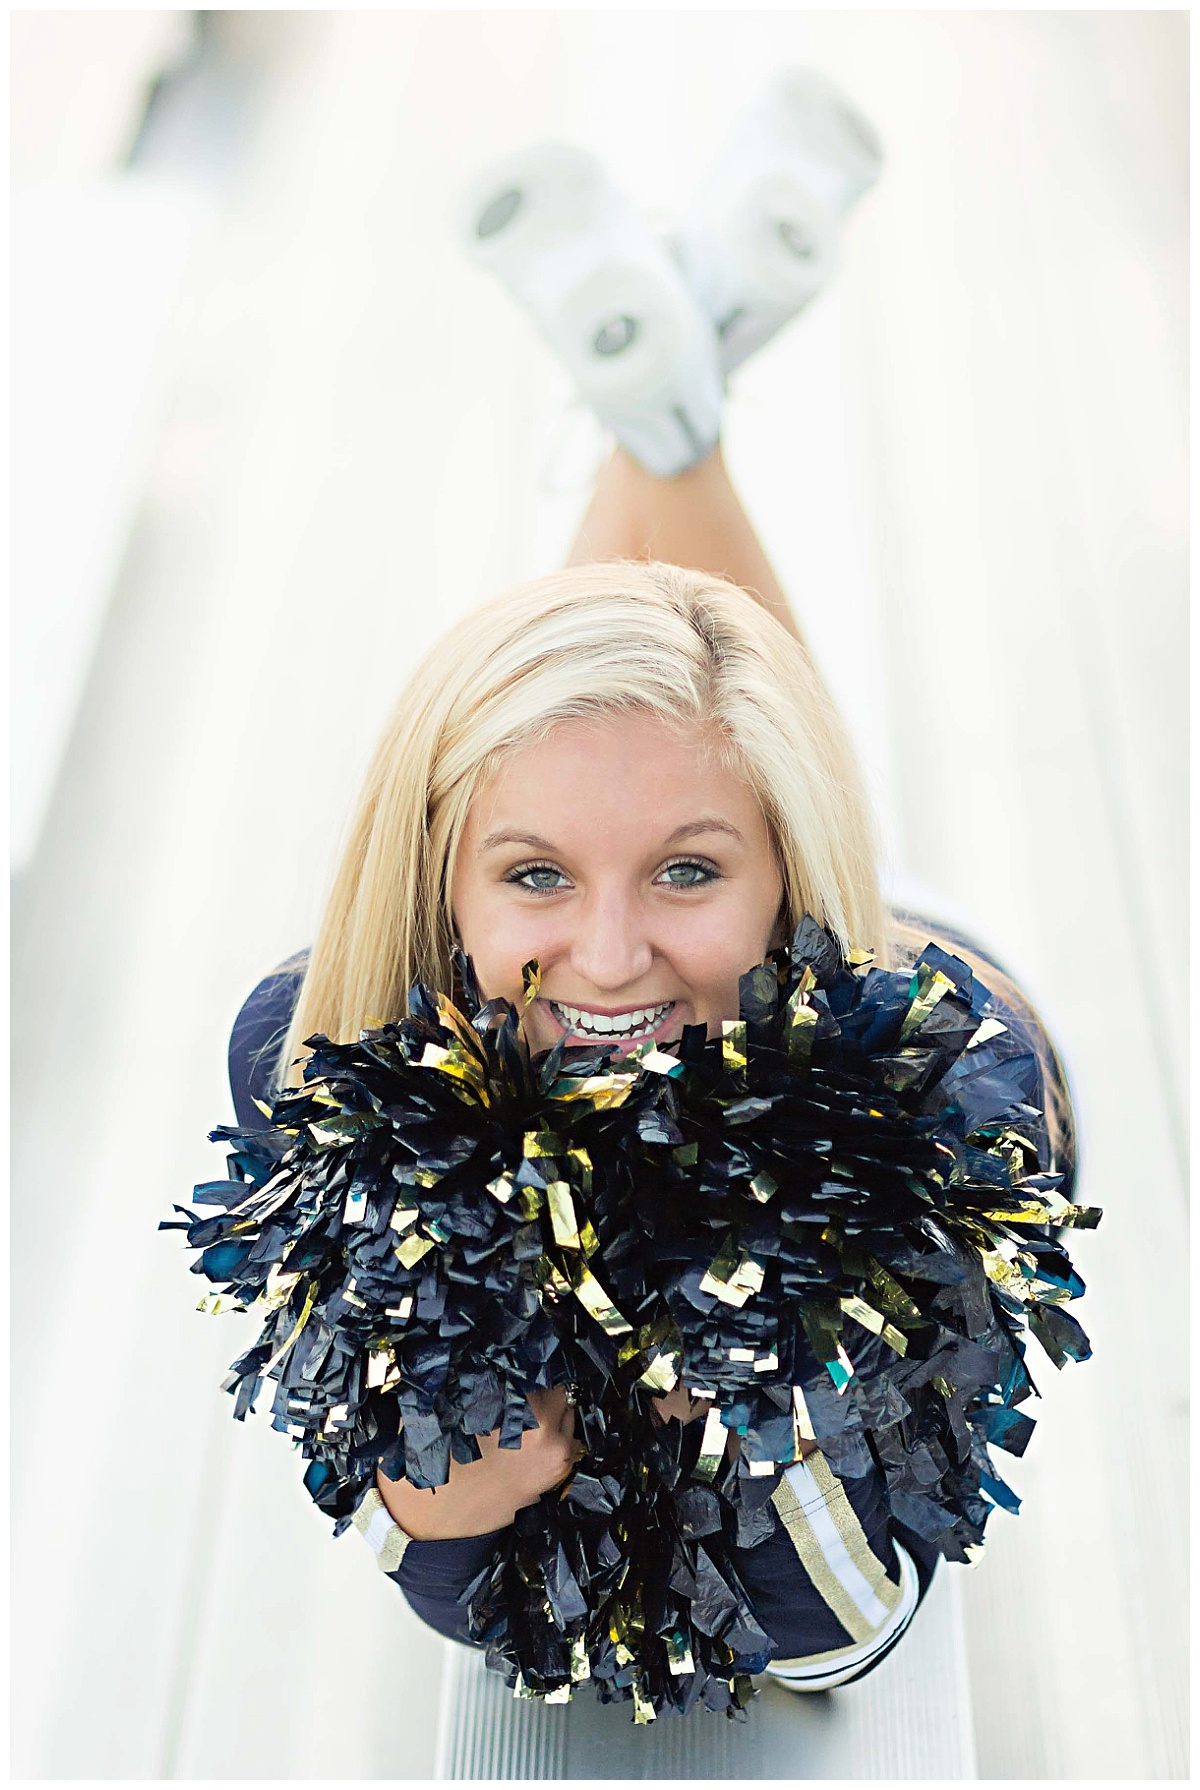 Why Use Props in Your Senior Pictures|sports gear